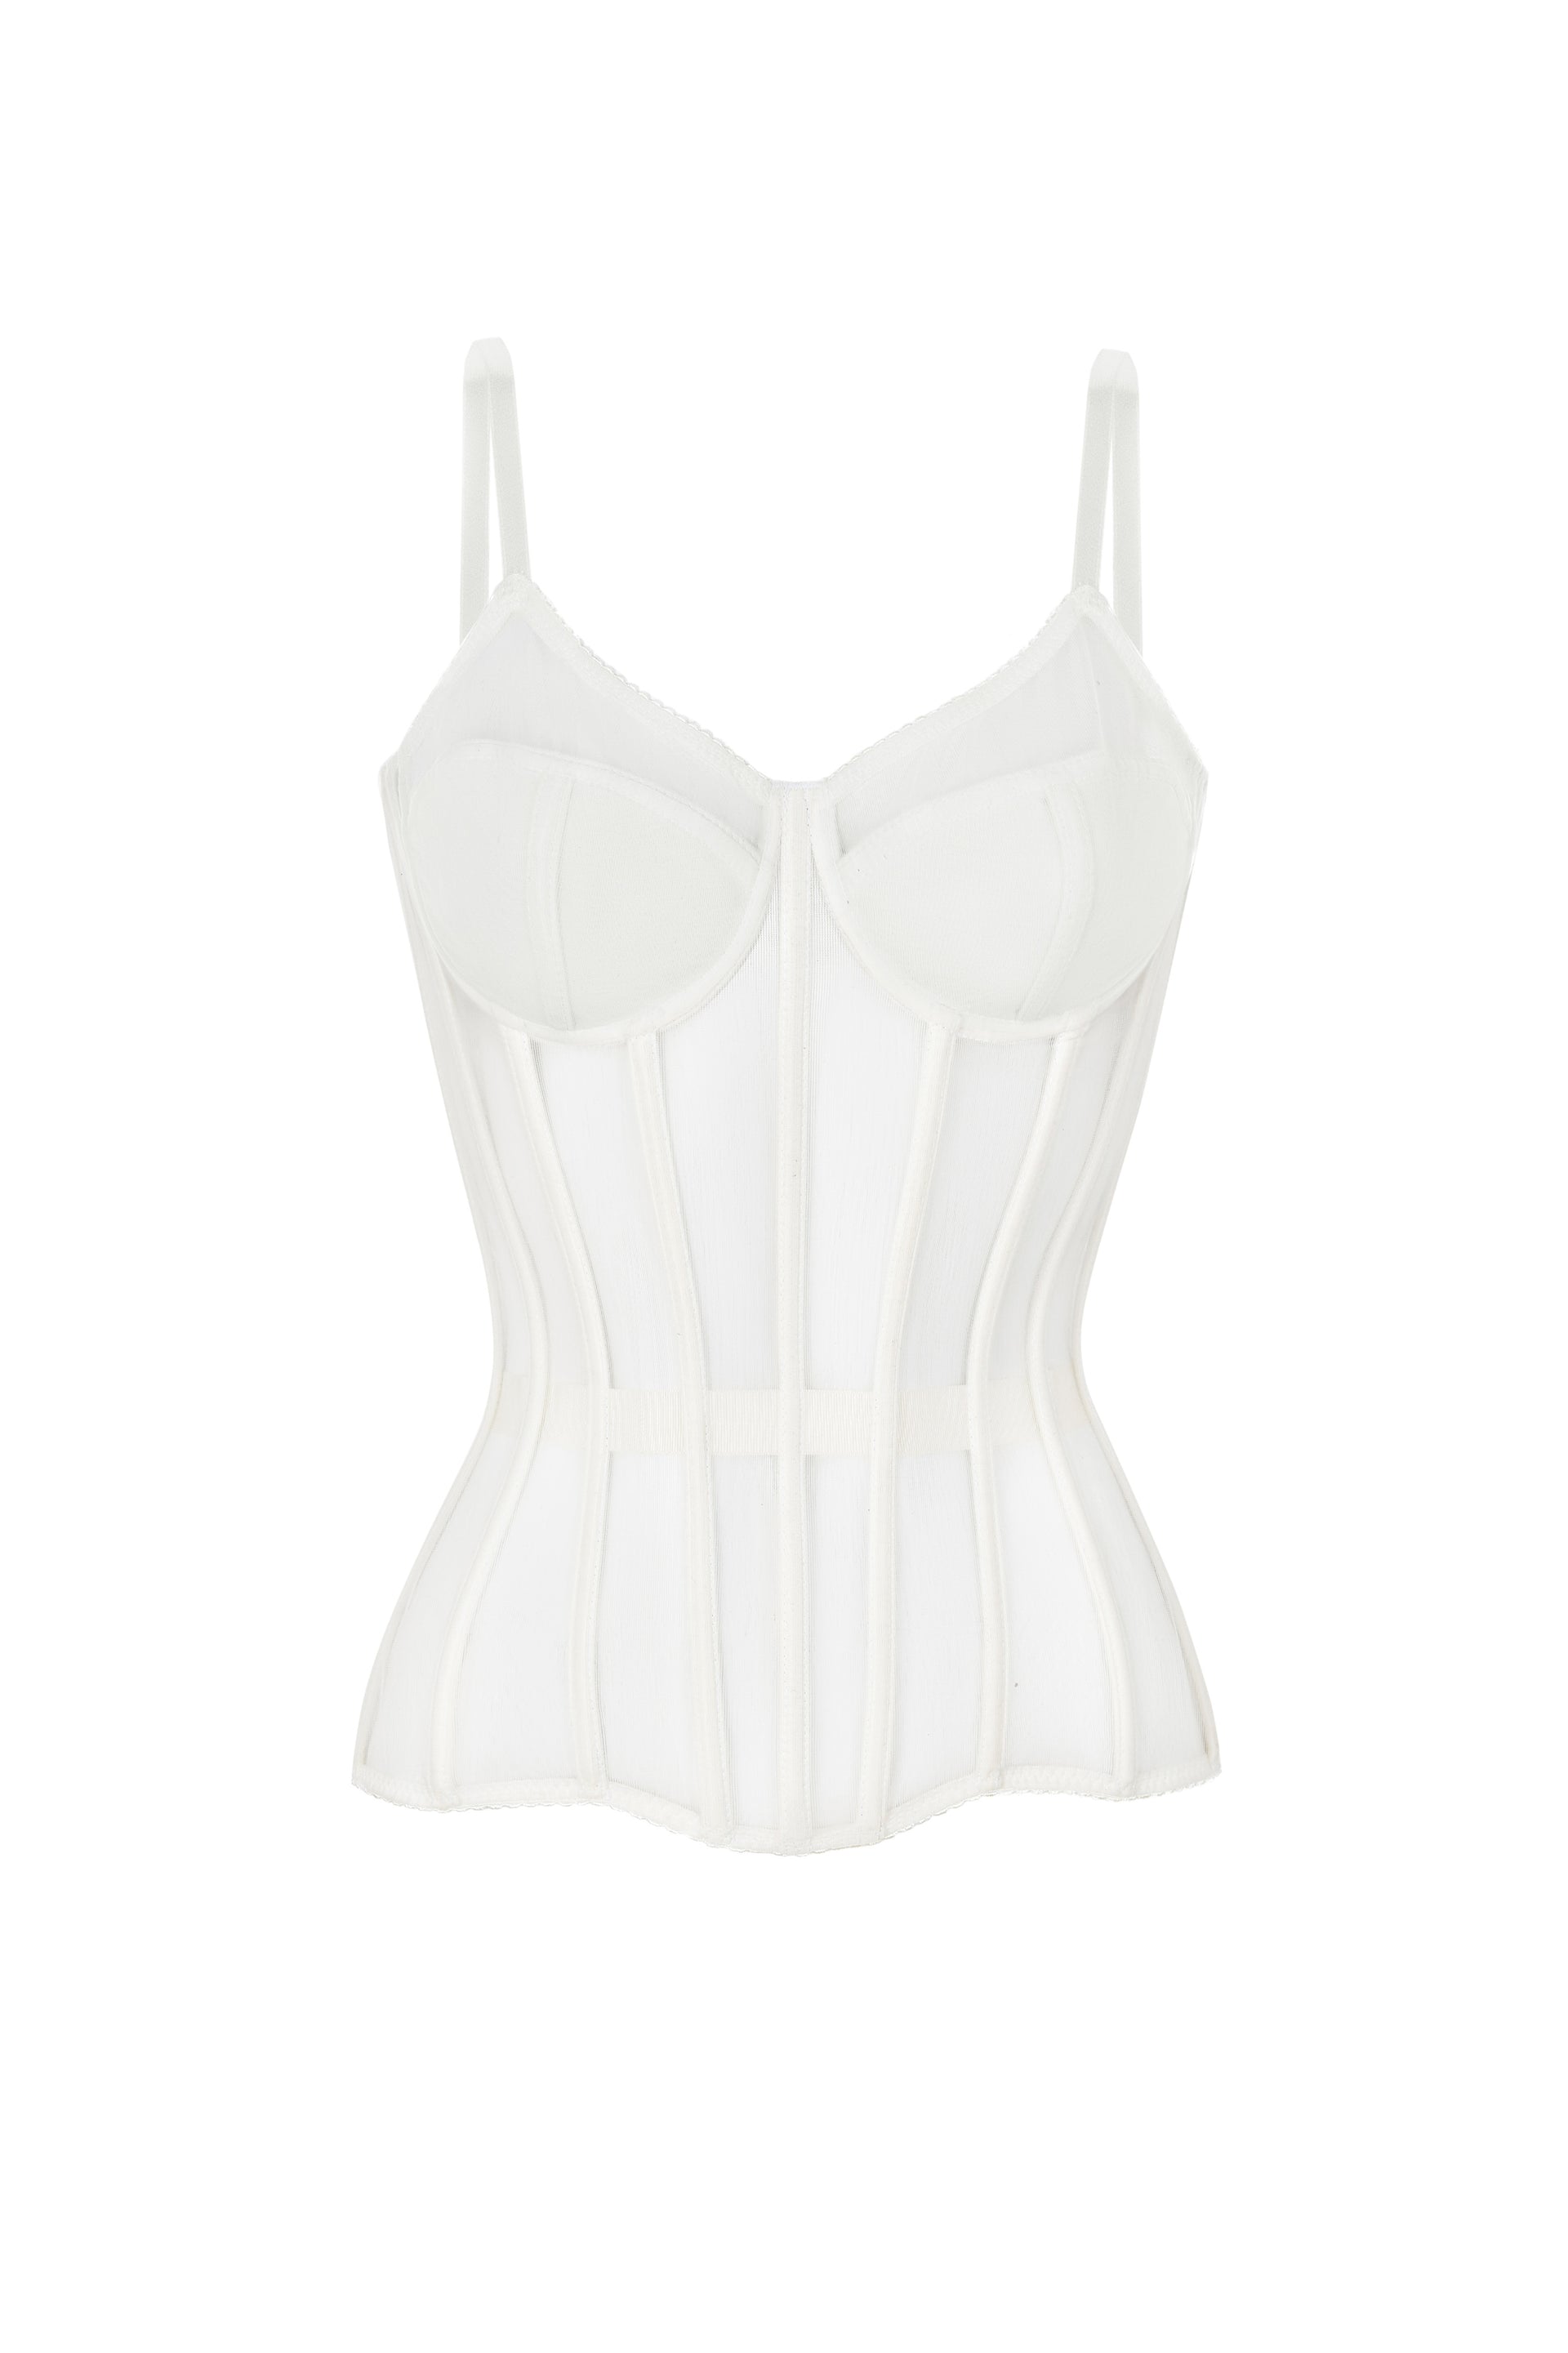 Off white corset with transparent cups - STATNAIA